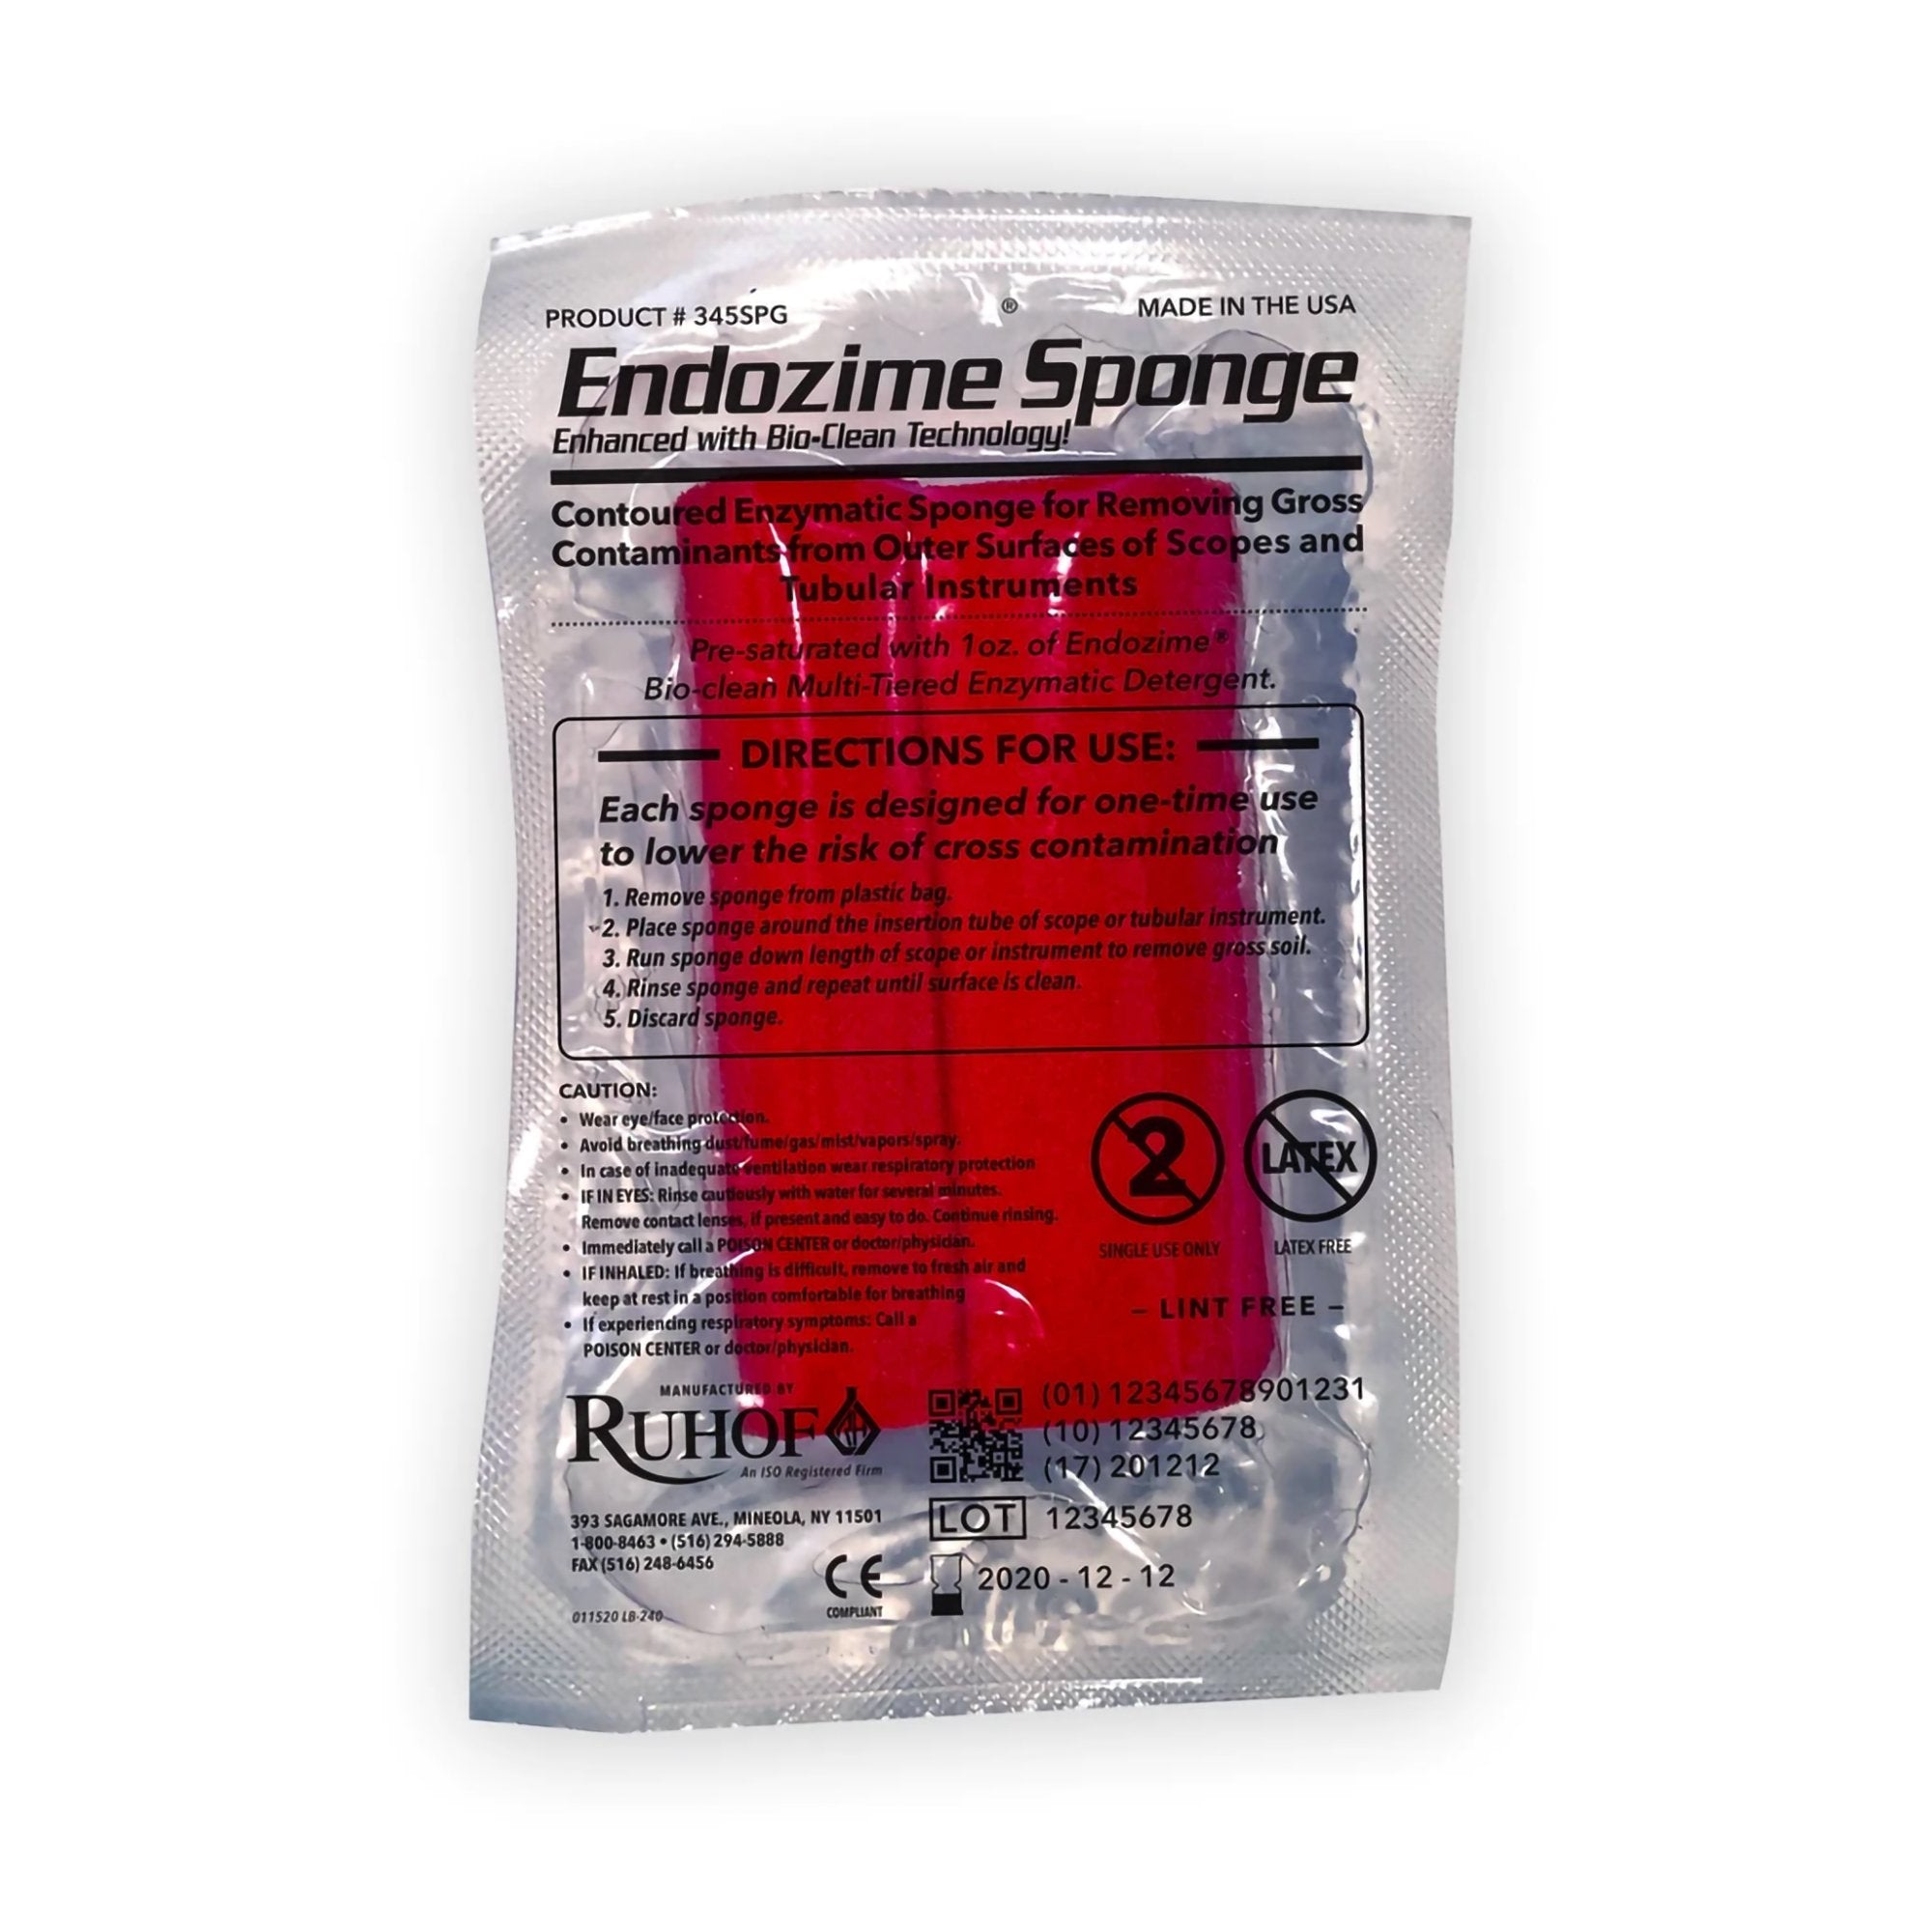 Enzymatic Sponge Endozime Highly Saturated in Endozime*